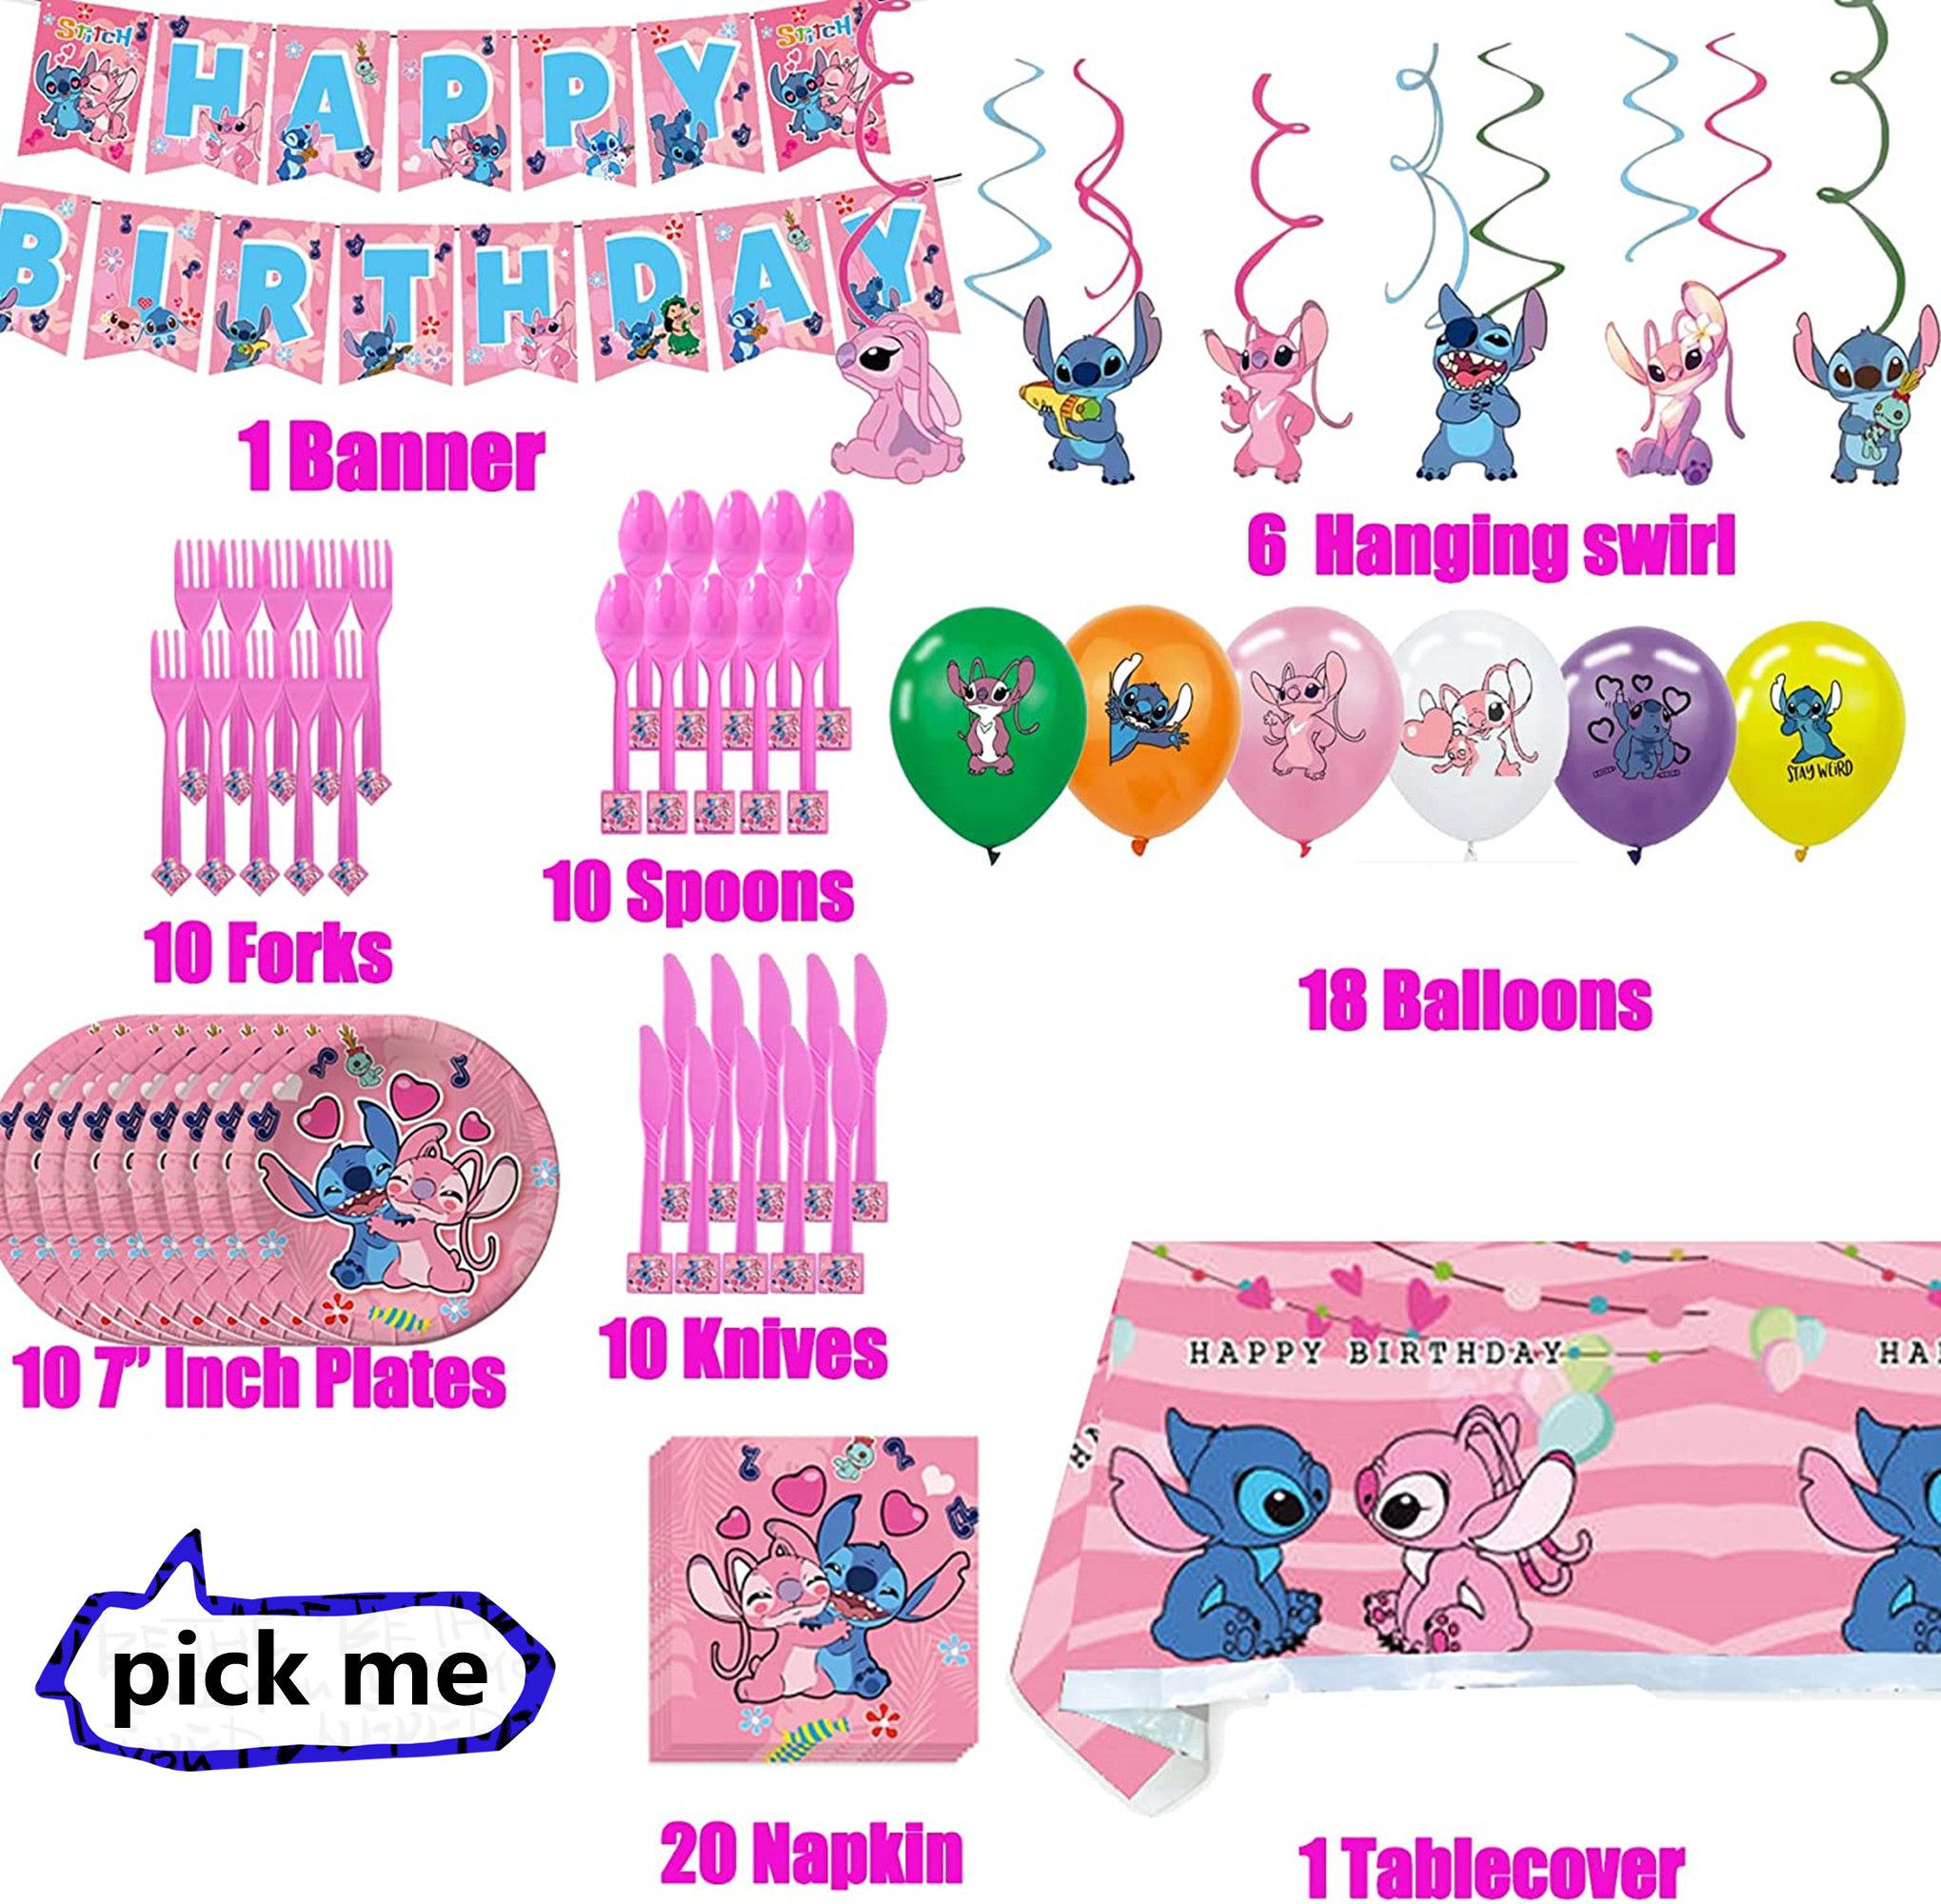 142PCS Pink Lilo and Stitch Birthday Party Supplies for 10 Guests, Party  Birthday Decorations included Happy Birthday Banner, Balloons, Forks,  Tableware 